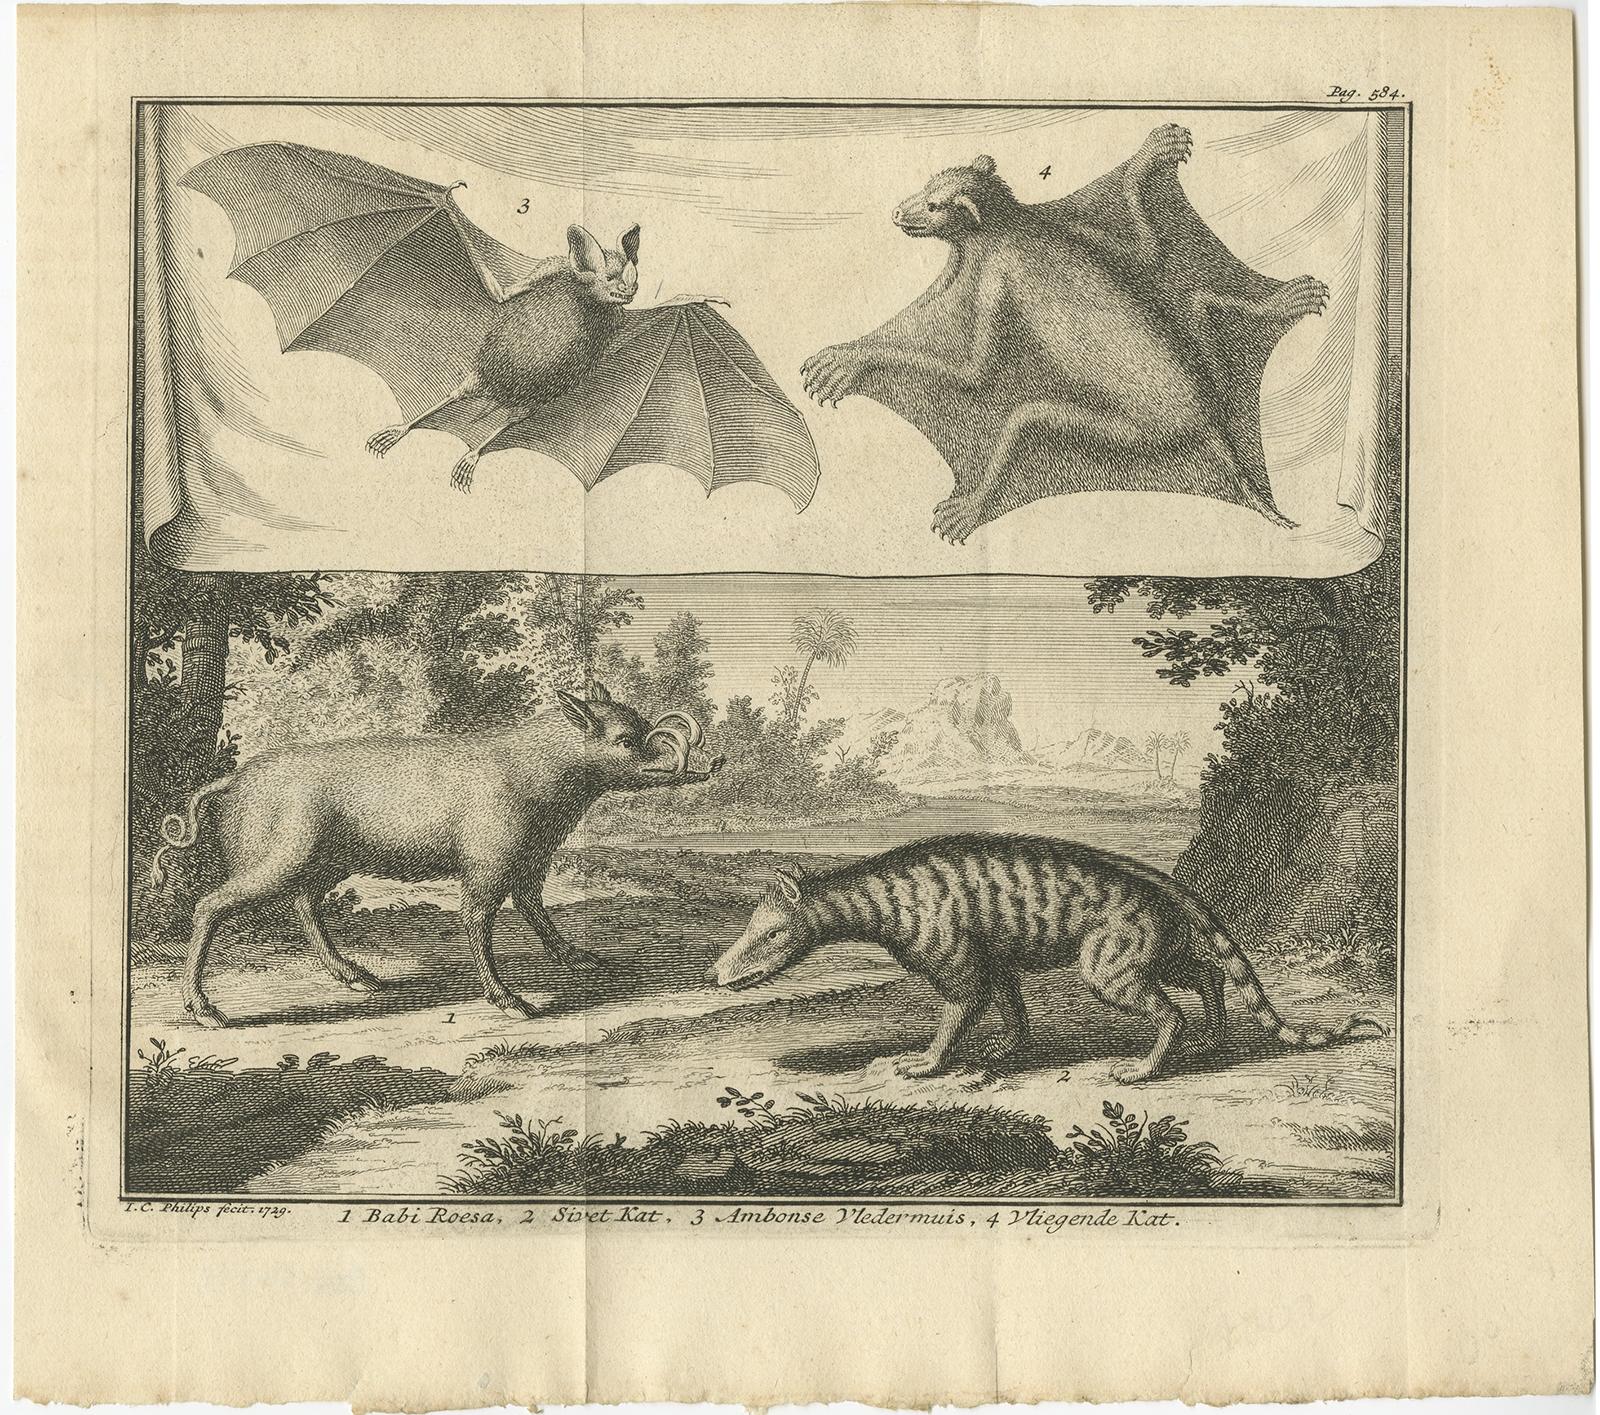 Untitled print of various wild cats and bats. Dutch subtitles ‘1 Babi Roesa, 2 Sivet Kat, 3 Ambonse Vledermuis, 4 Vliegende Kat’. 

A civet is a small, lean, mostly nocturnal mammal native to tropical Asia and Africa, especially the tropical